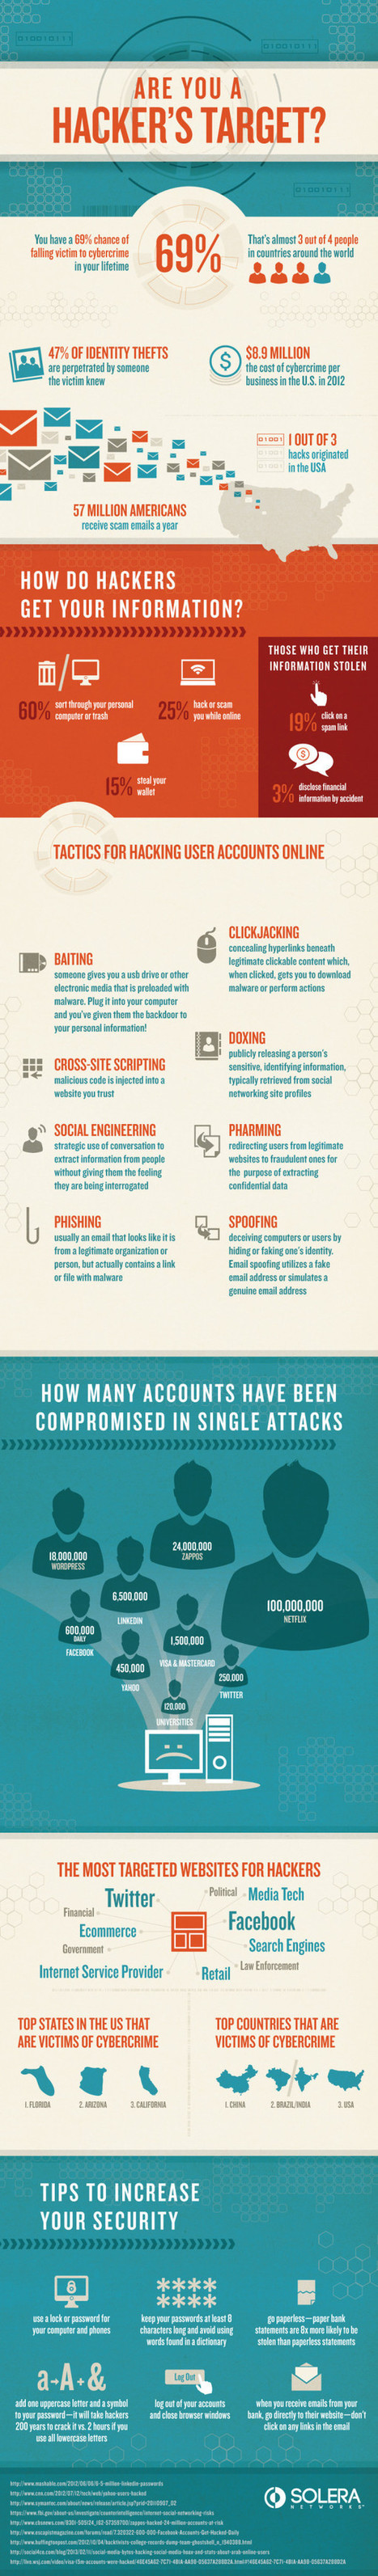 Are you a hacker's target? [infographic] | Information Technology & Social Media News | Scoop.it